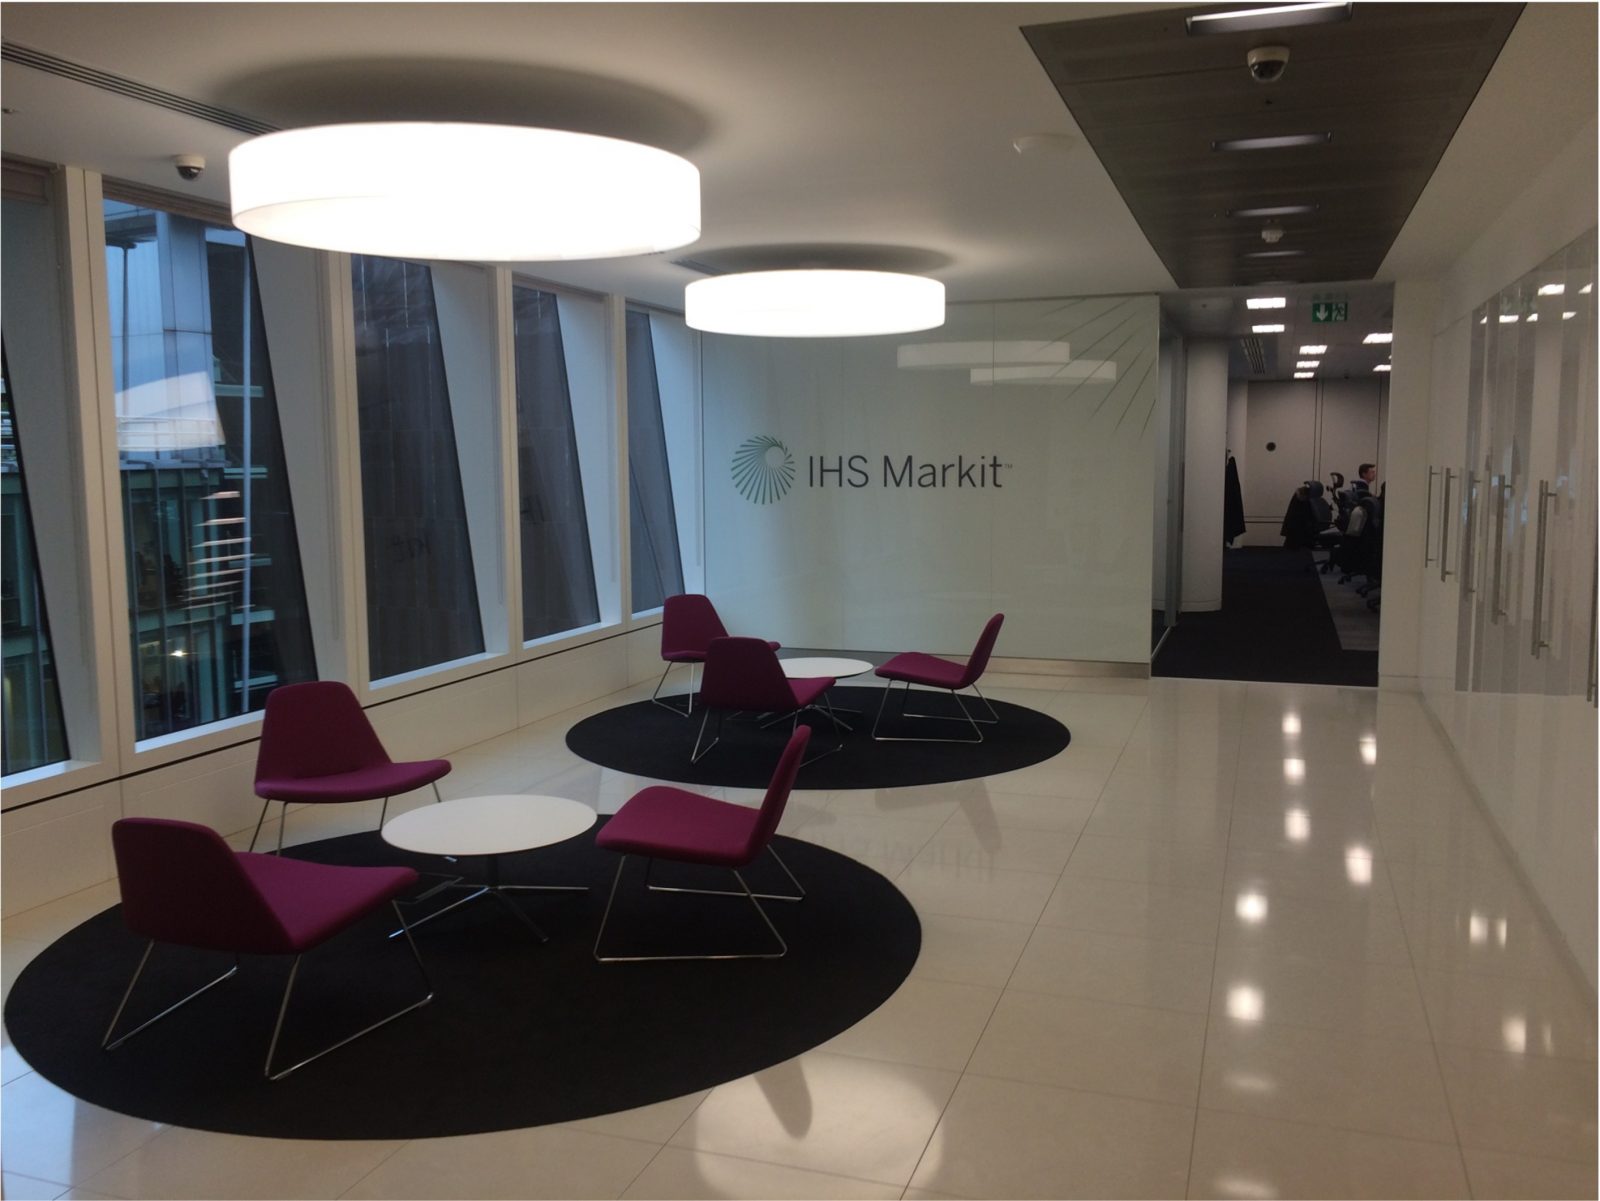 IHS Markit office space